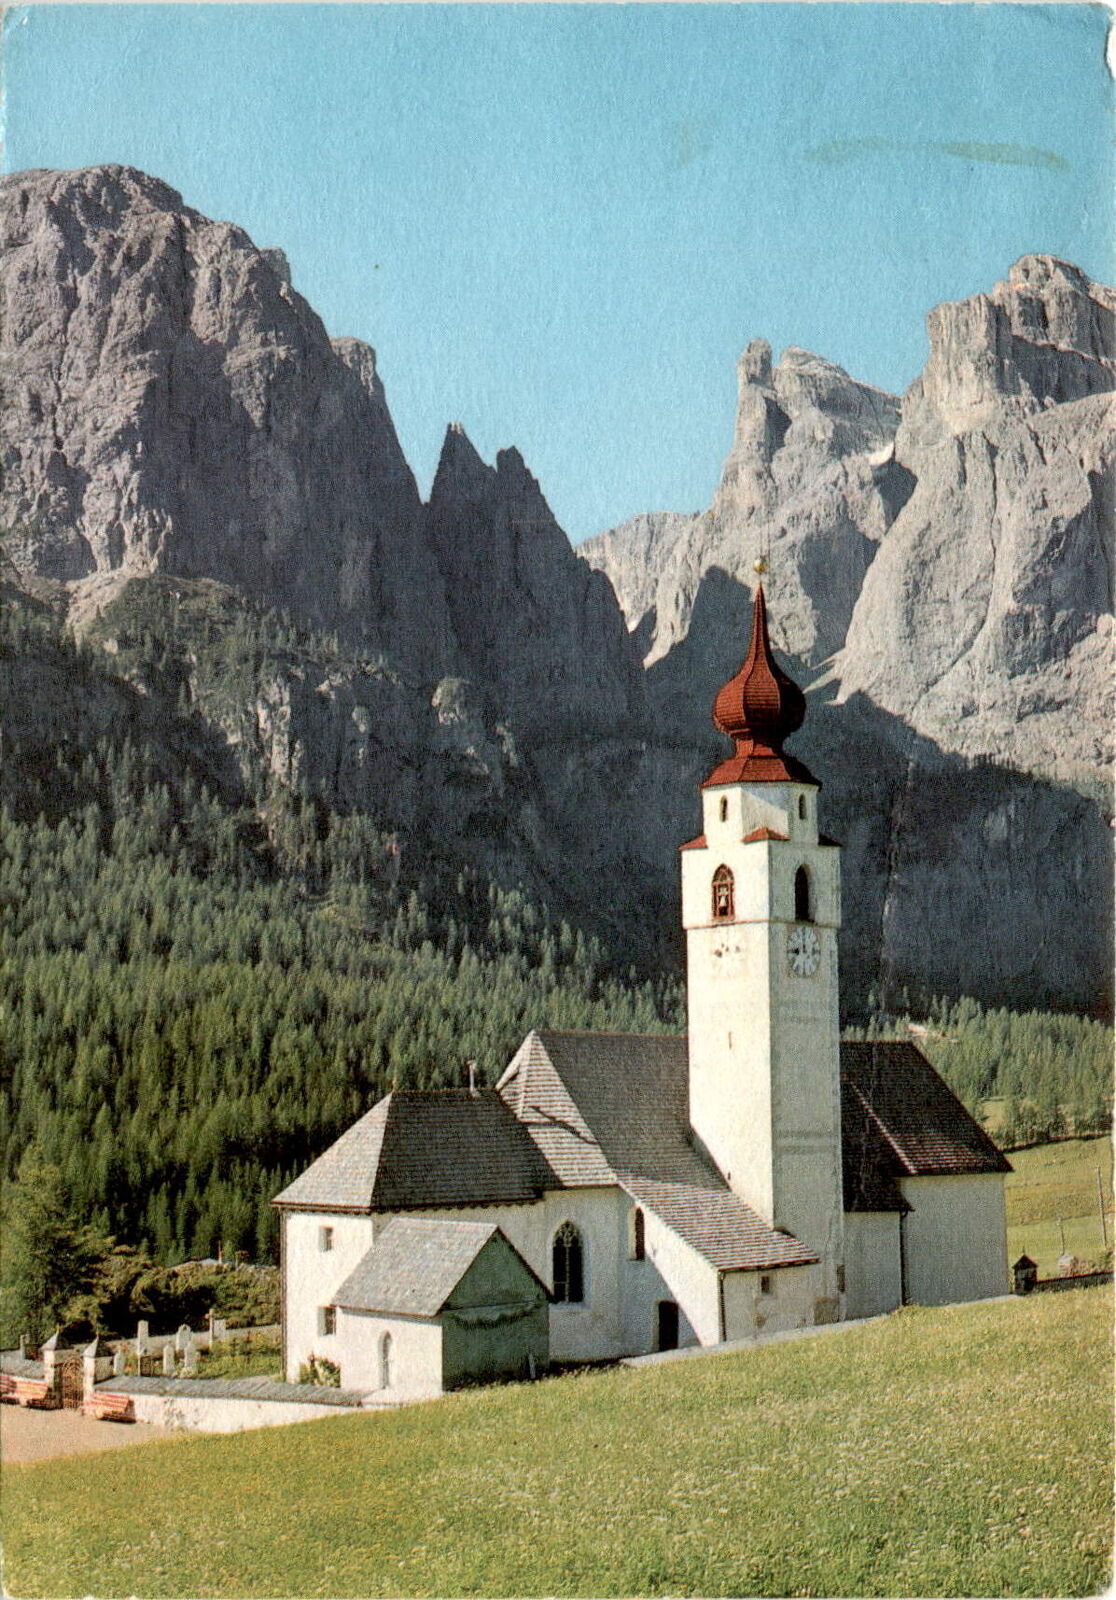 Church of Colfuschg Postcard: Holiday Wishes & Cultural Significance